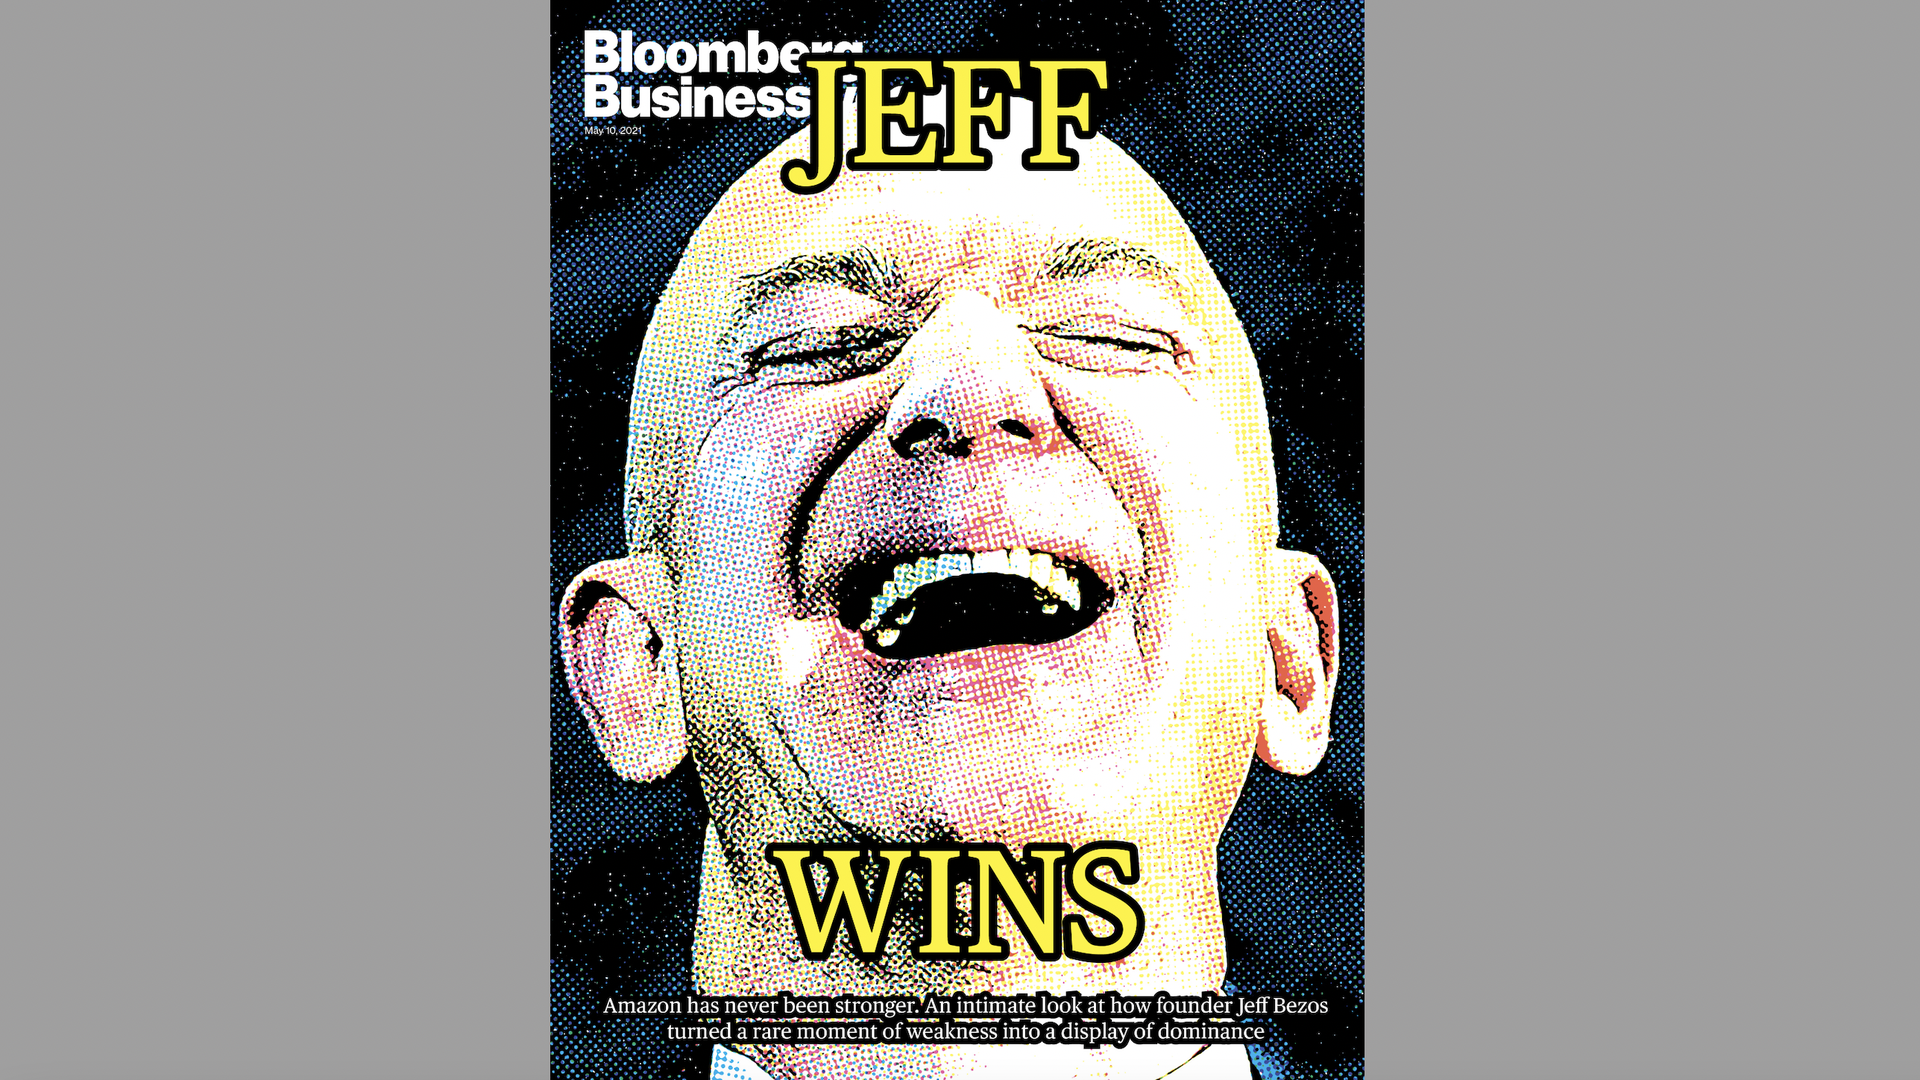 A BloomBerg BusinessWeek cover with a smiling Jeff Bezos and the headline "Jeff Wins"